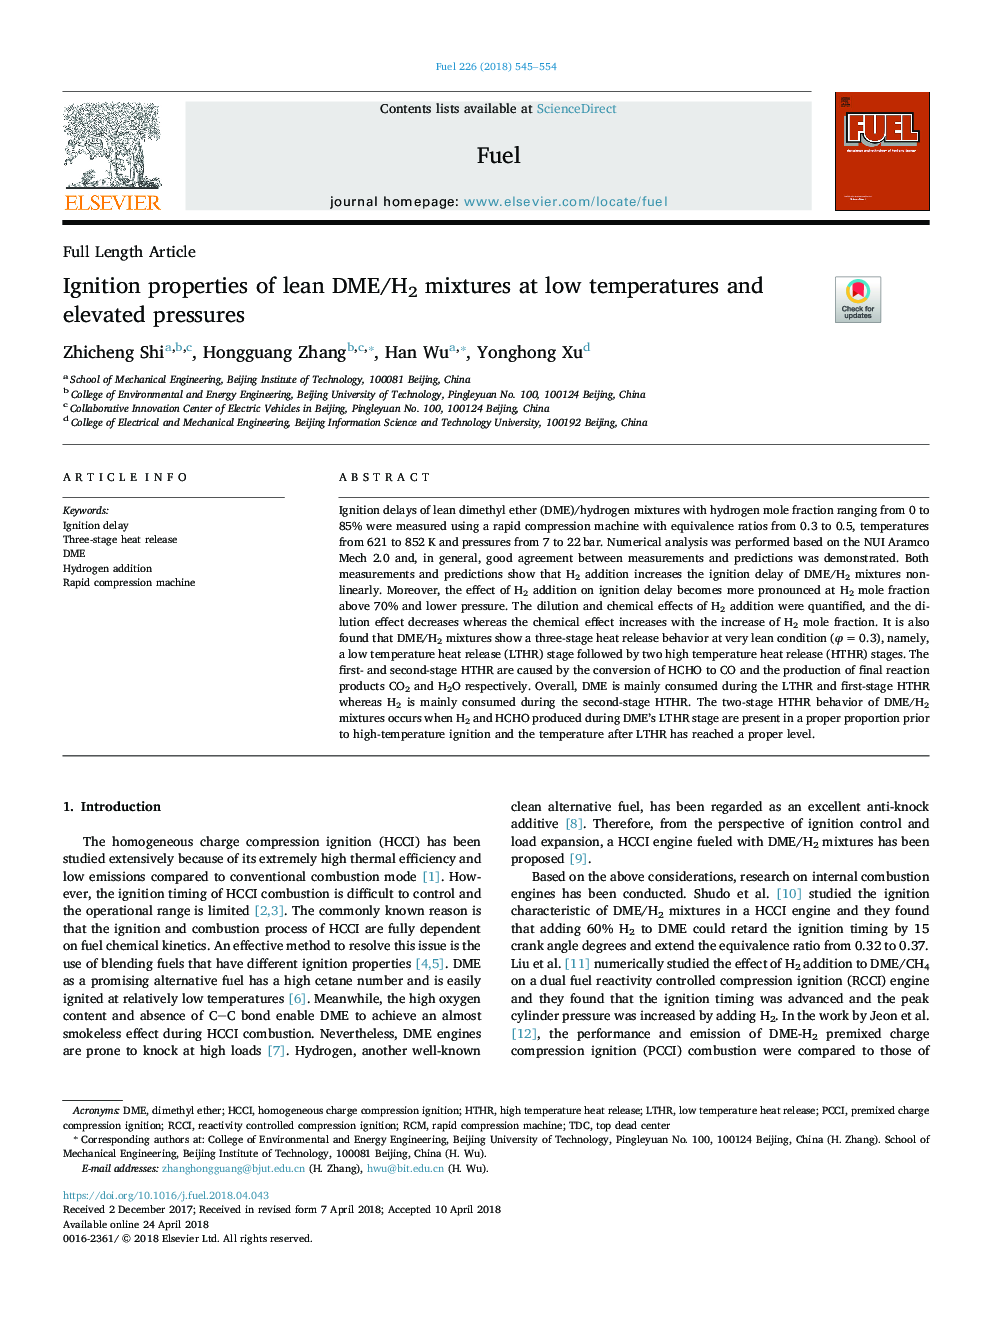 Ignition properties of lean DME/H2 mixtures at low temperatures and elevated pressures